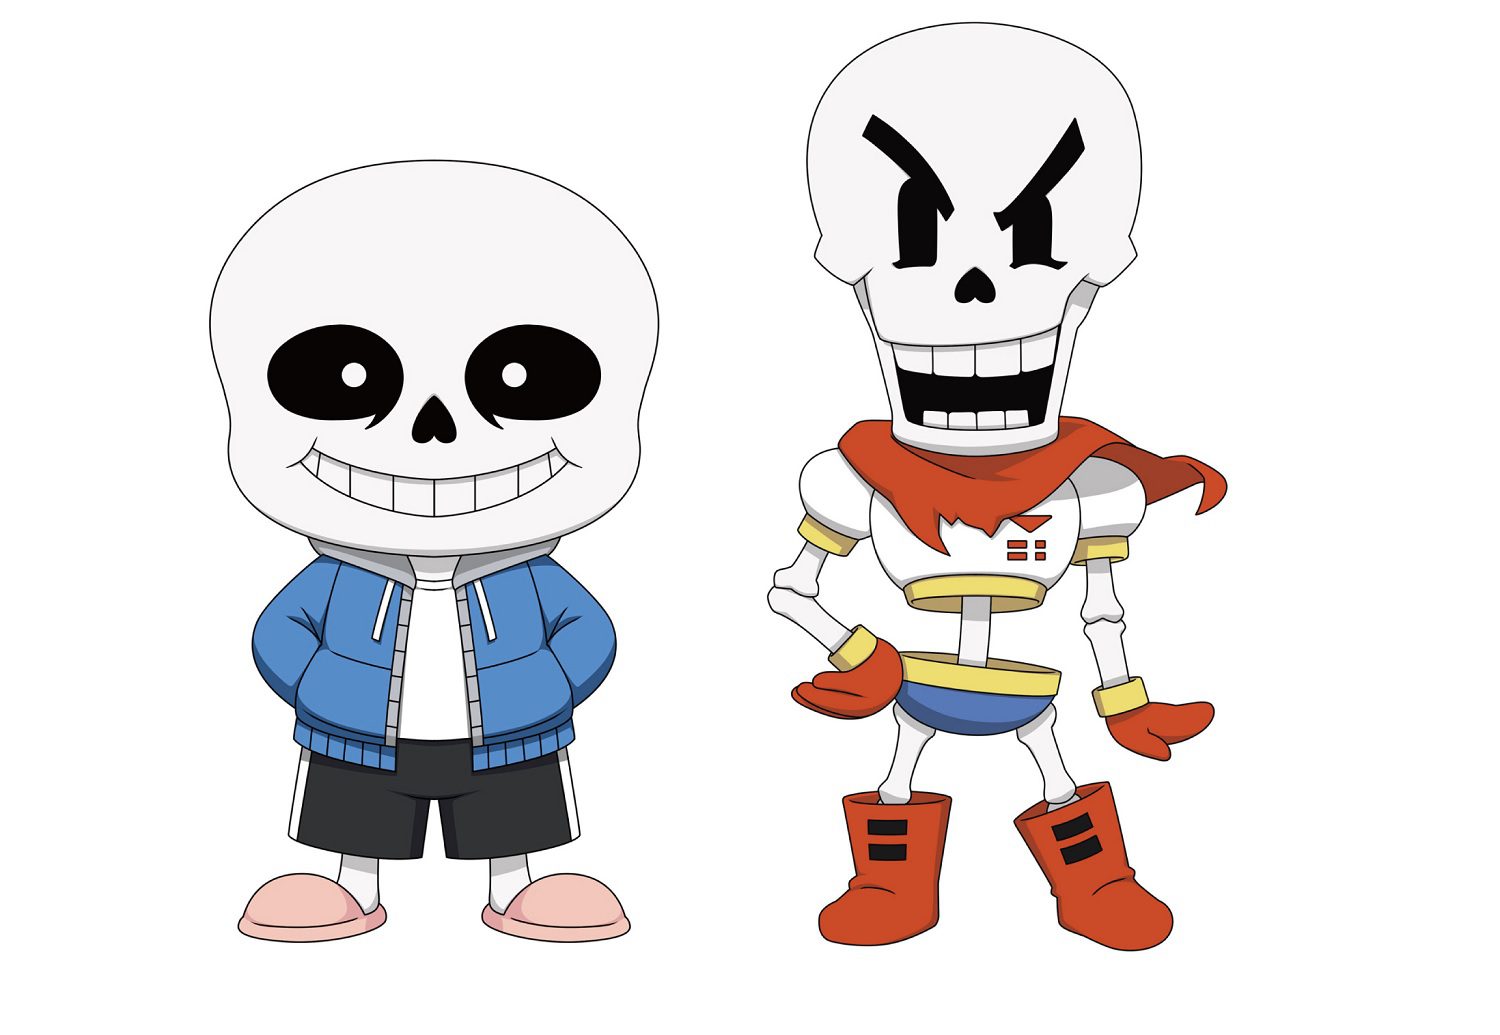 Sans And Papyrus Of Undertale Fame Are In Line For Nendoroid Figures